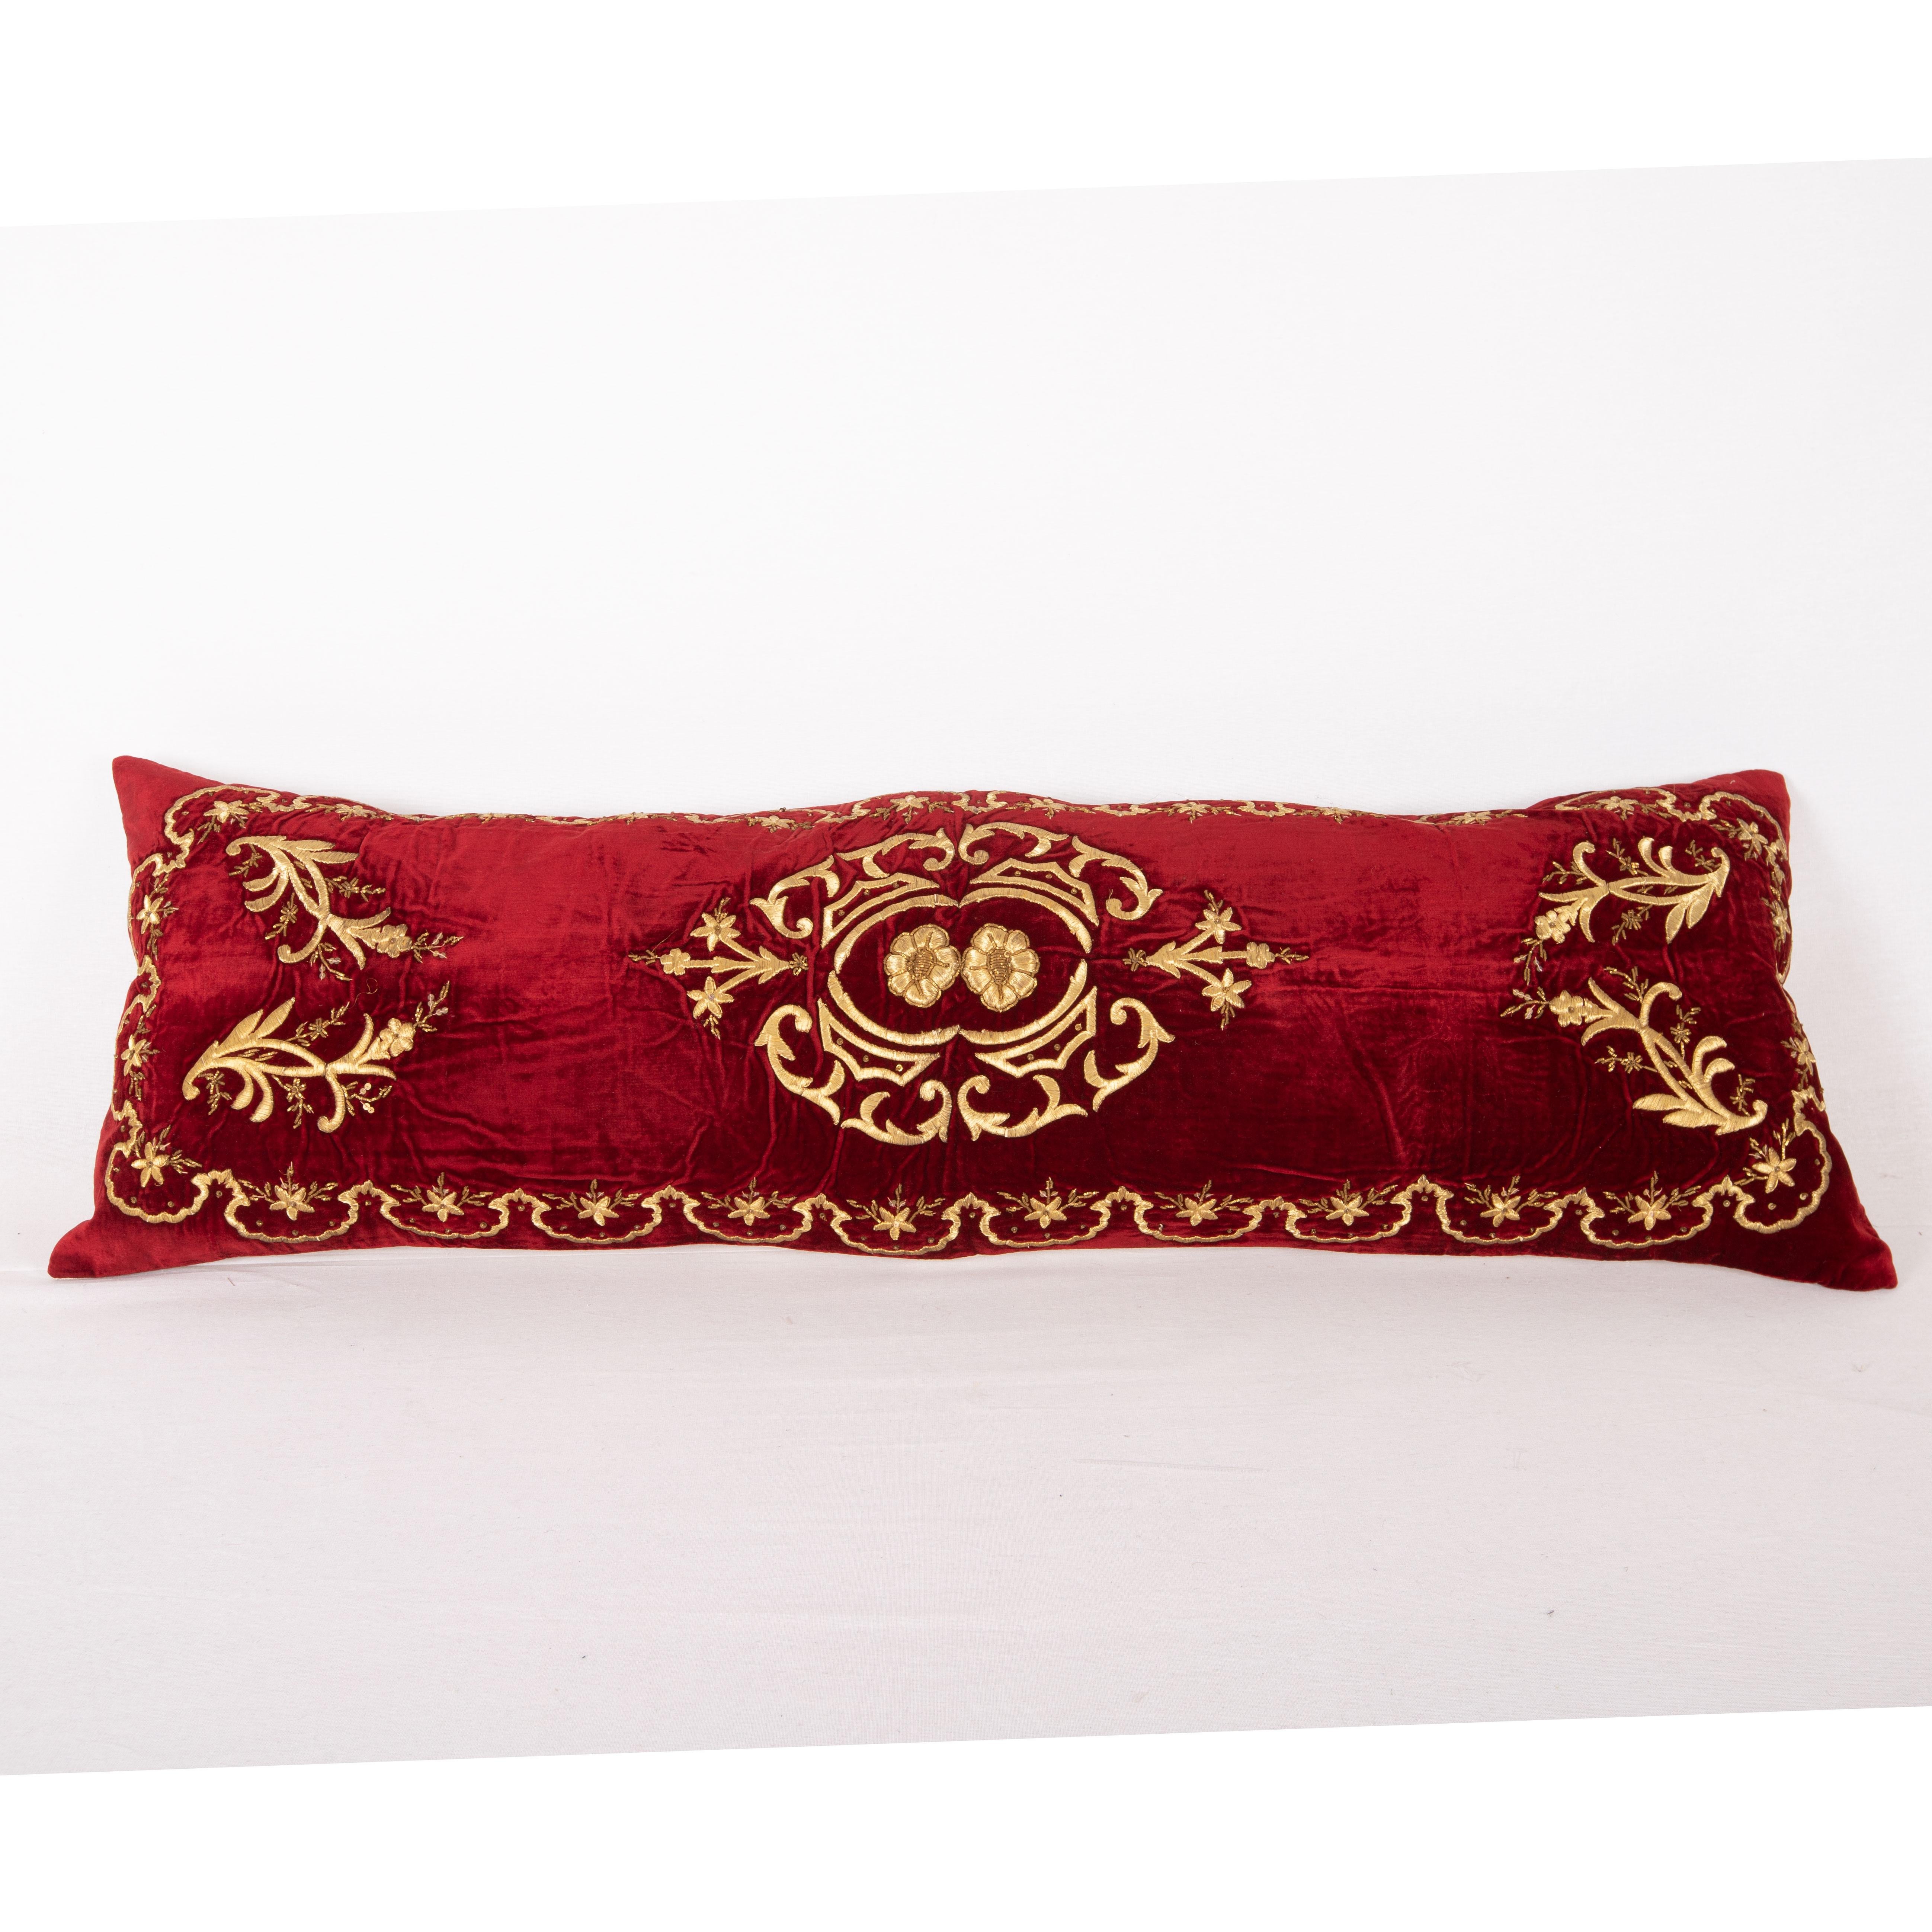 This a a very good example to silk velvet Sara pillows. It is the original size since we have just replaced the backing.

It doe not come with an insert but a bag made to the size to accommodate insert materials.
Linen in the back.
Zipper